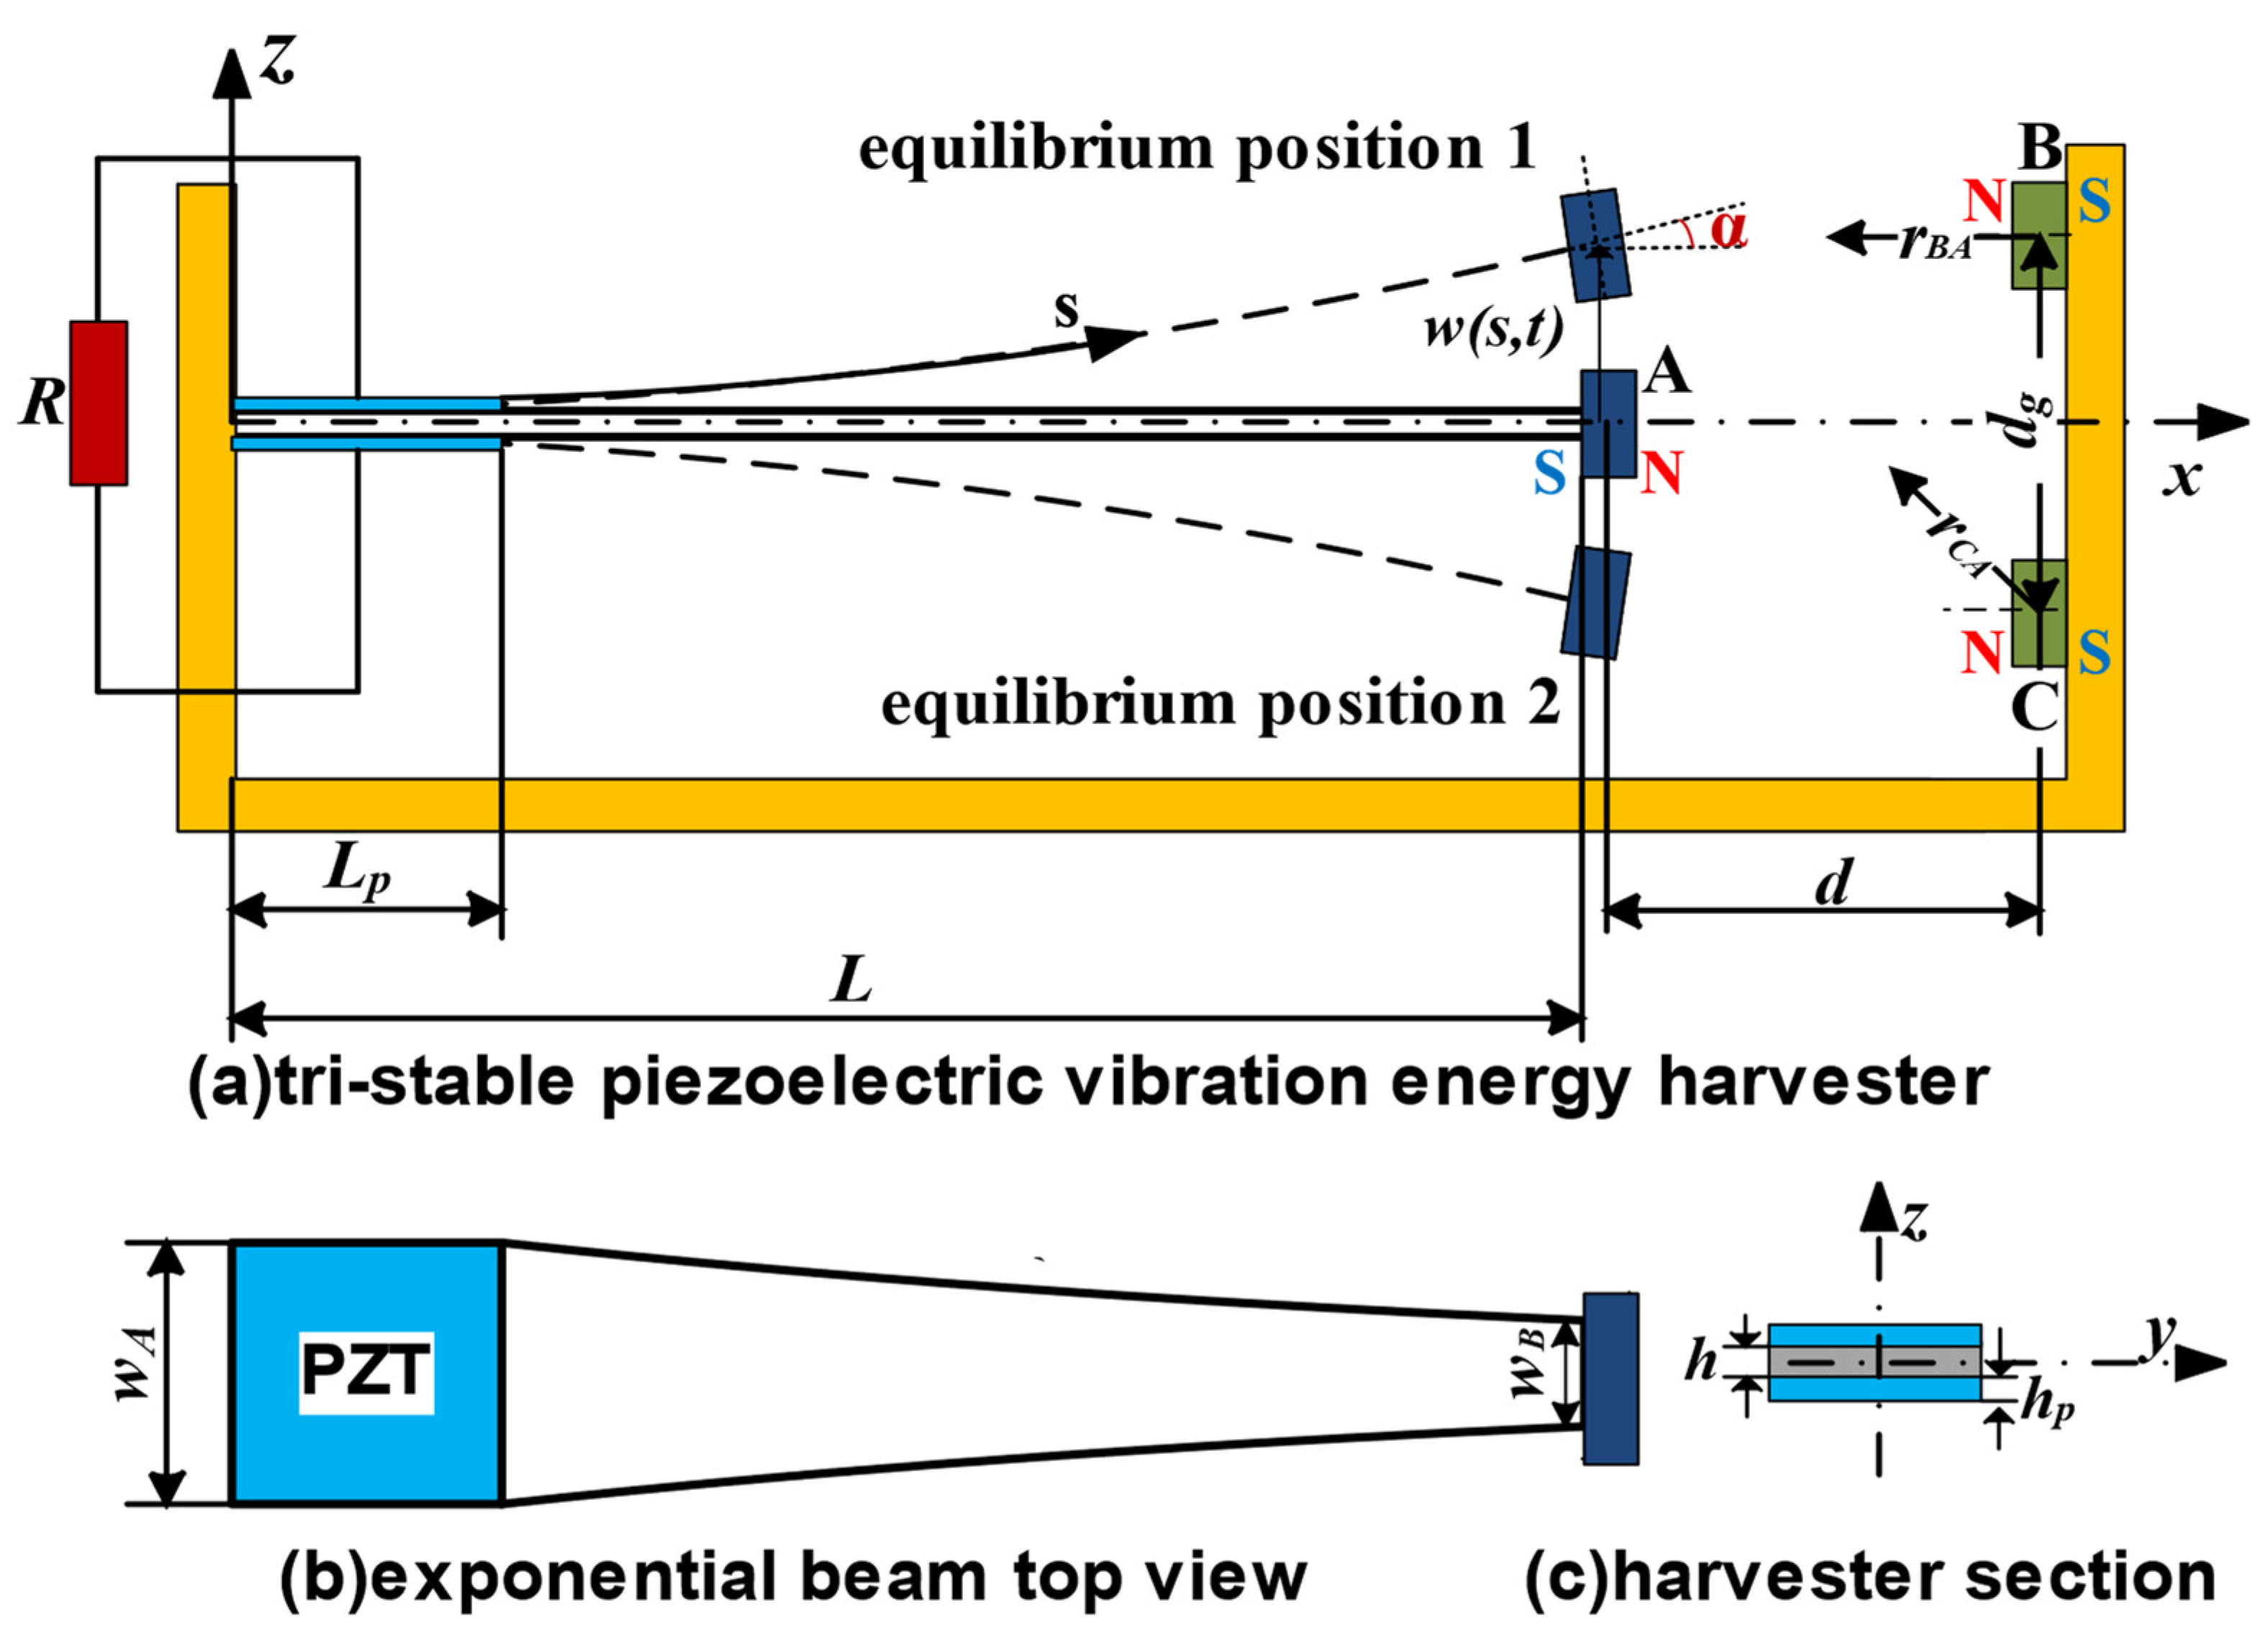 Vibration energy harvester represented here as a cantilever system.